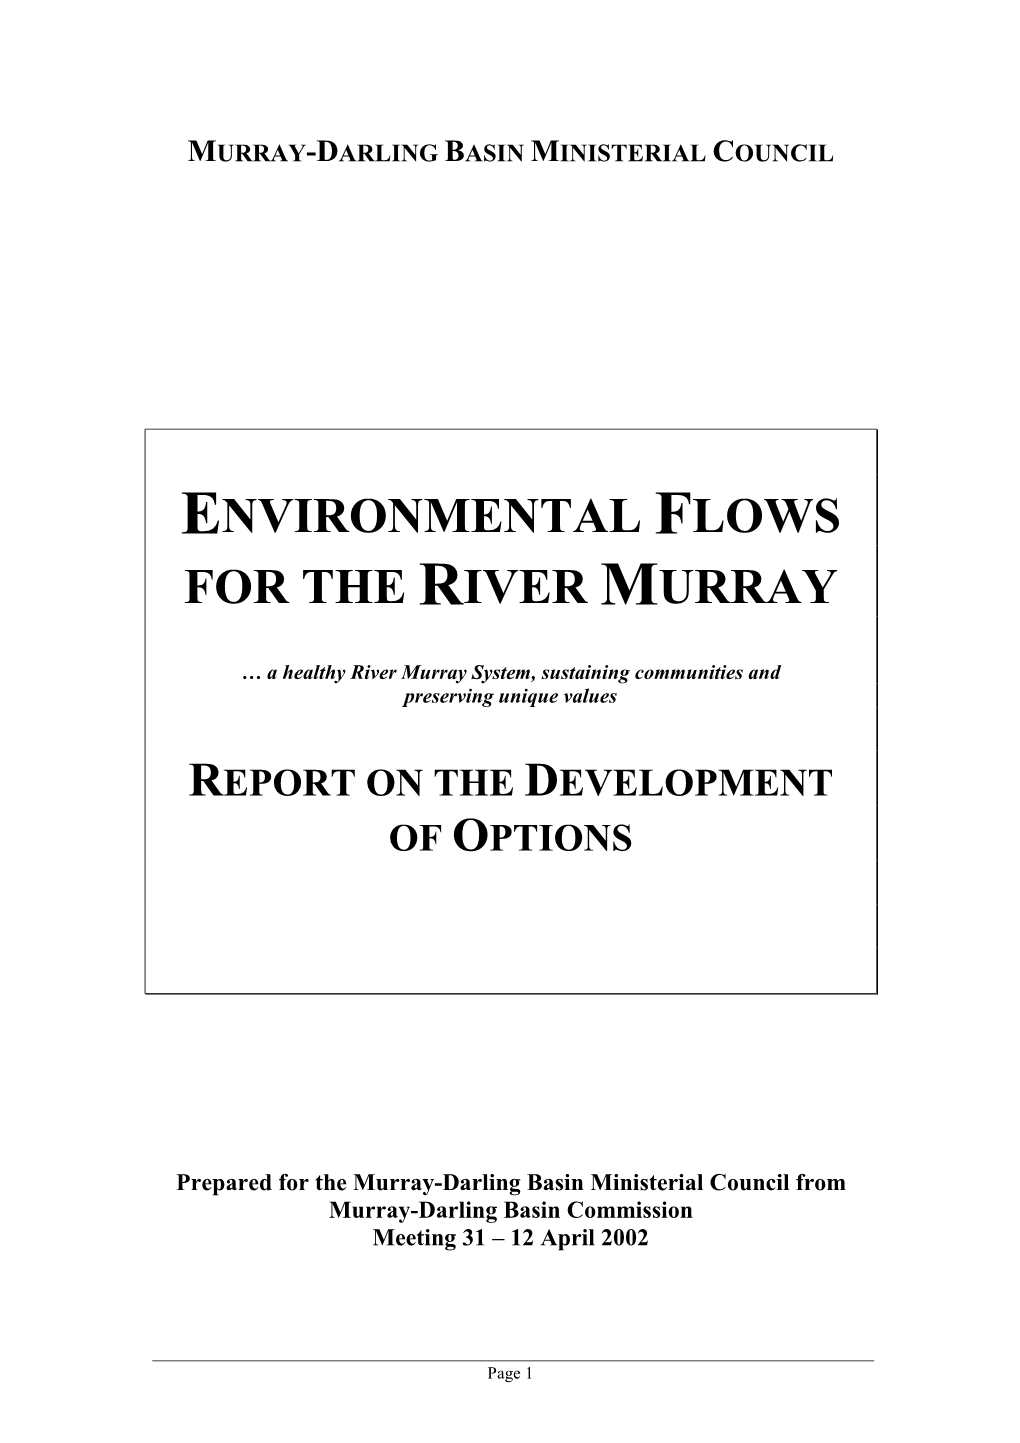 Environmental Flows for the River Murray Report on The